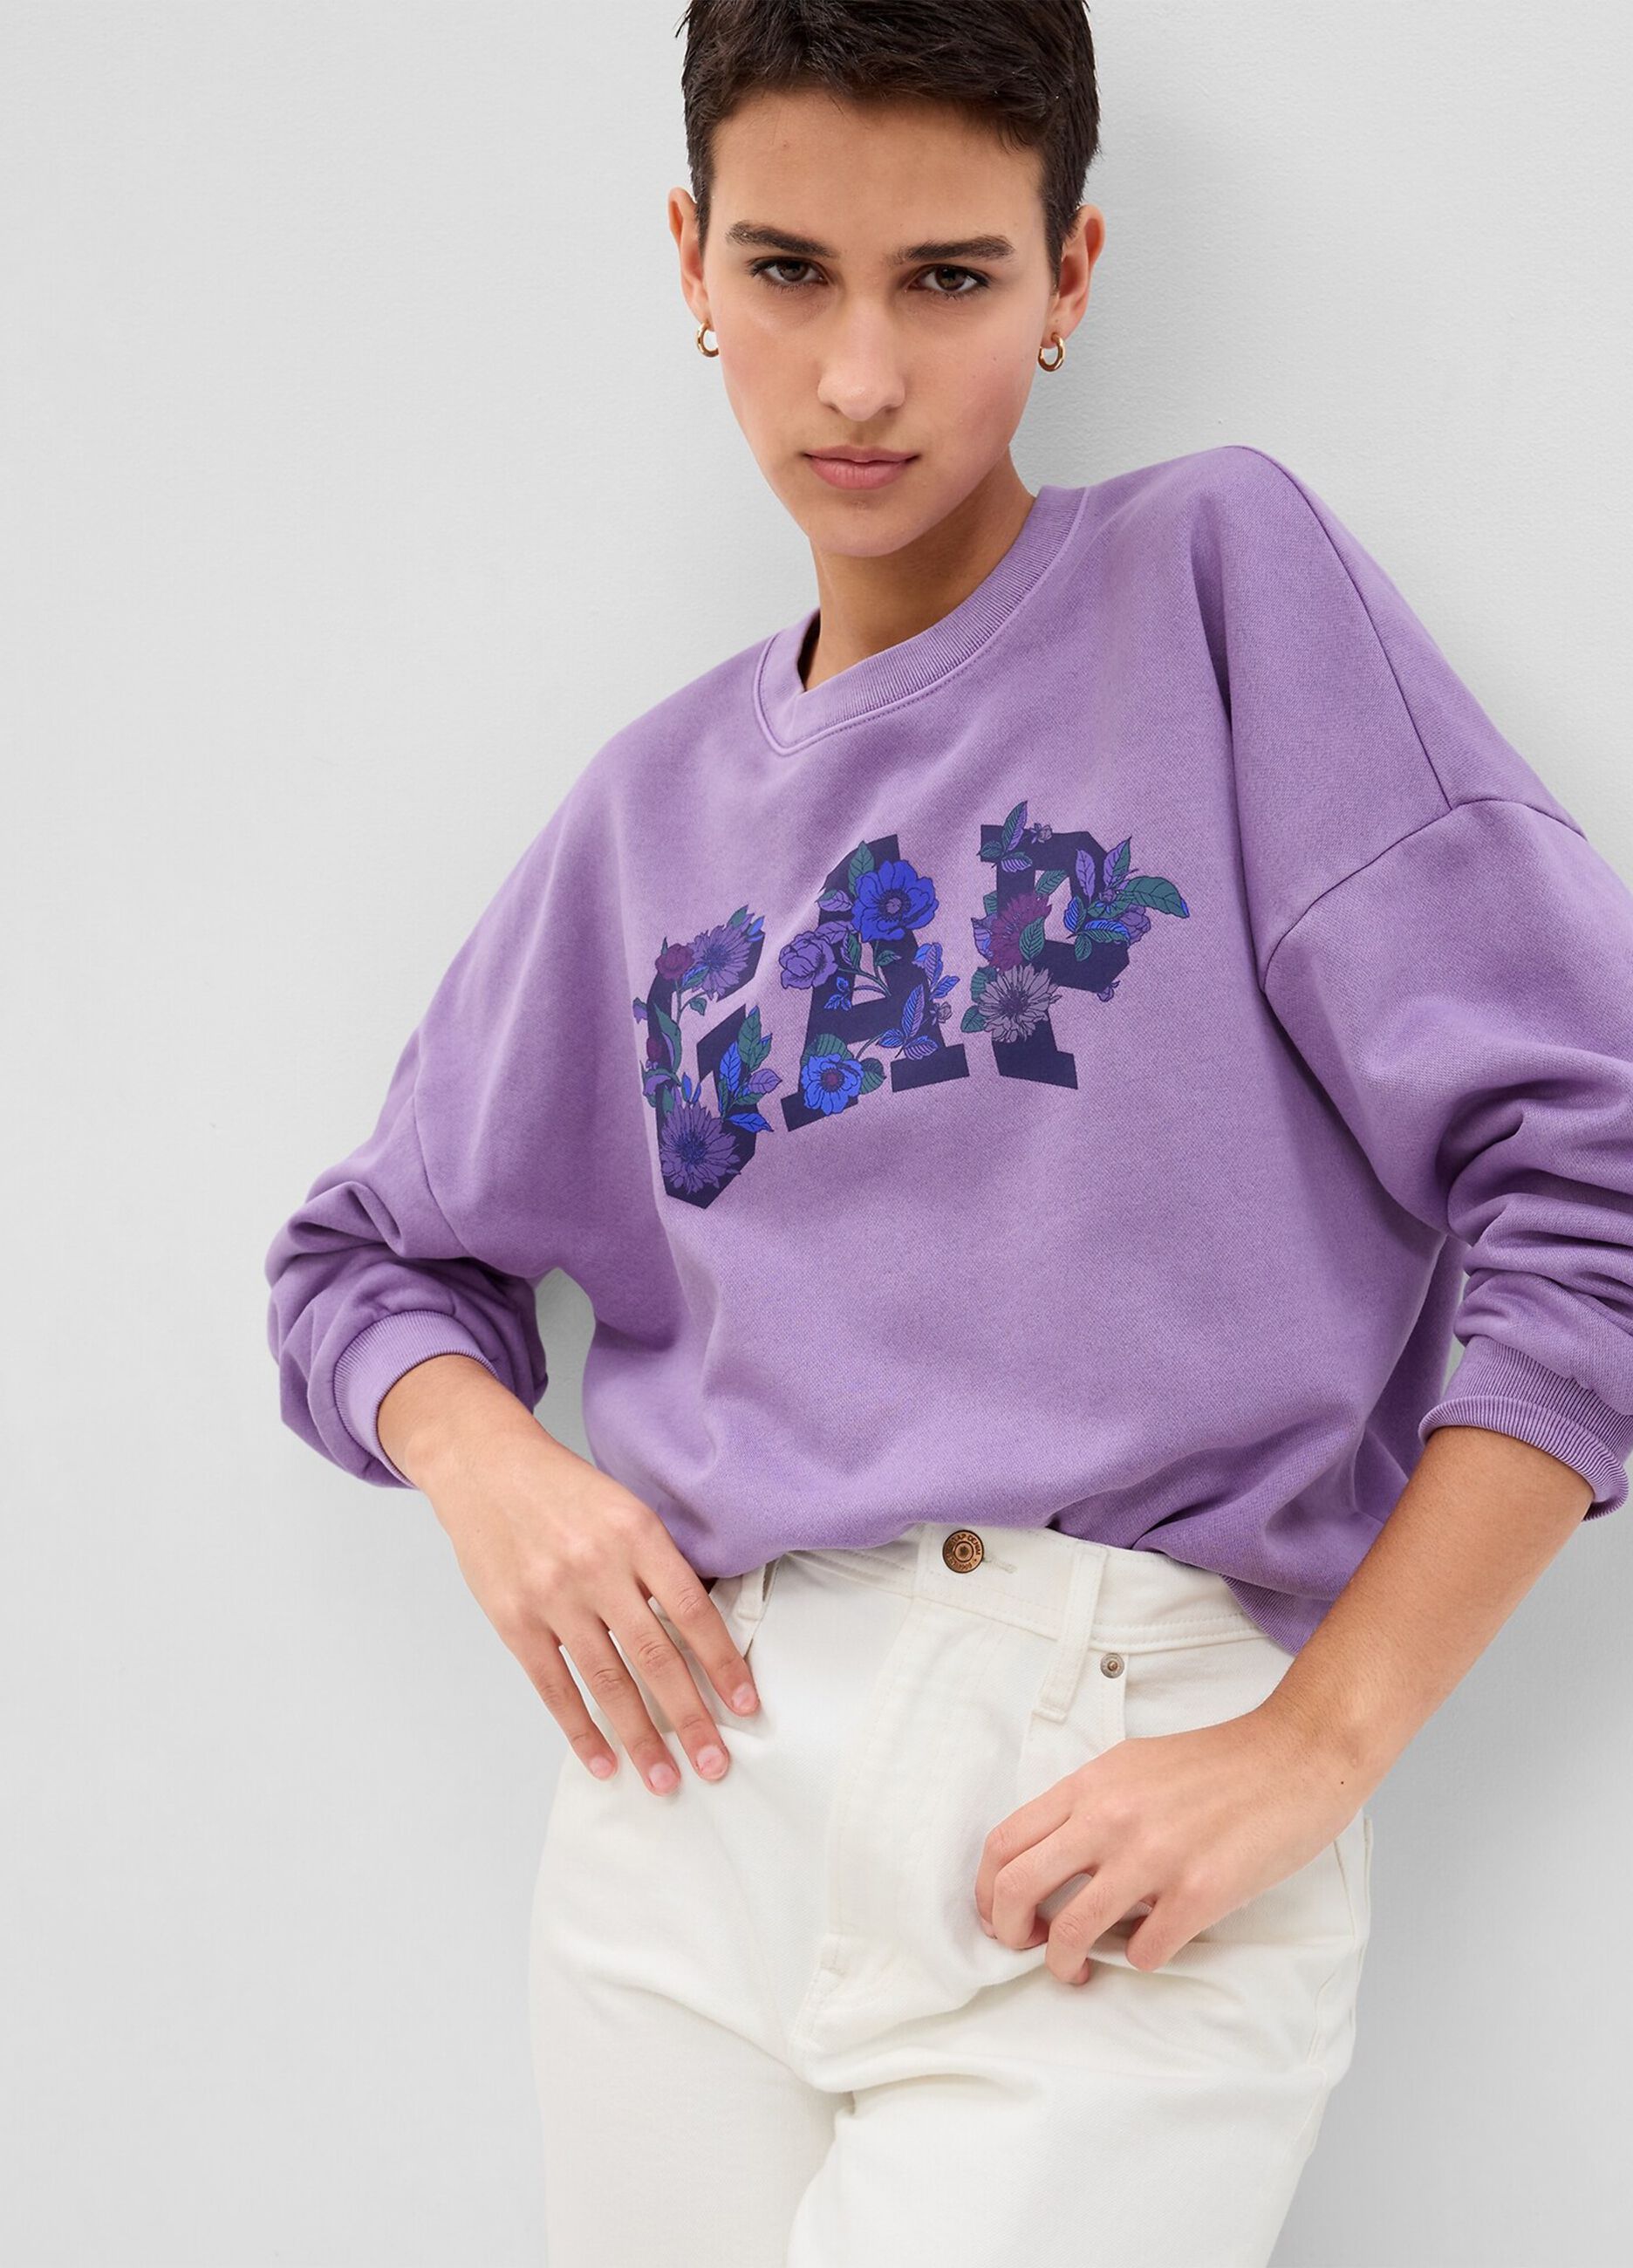 Sweatshirt with round neck and floral logo print